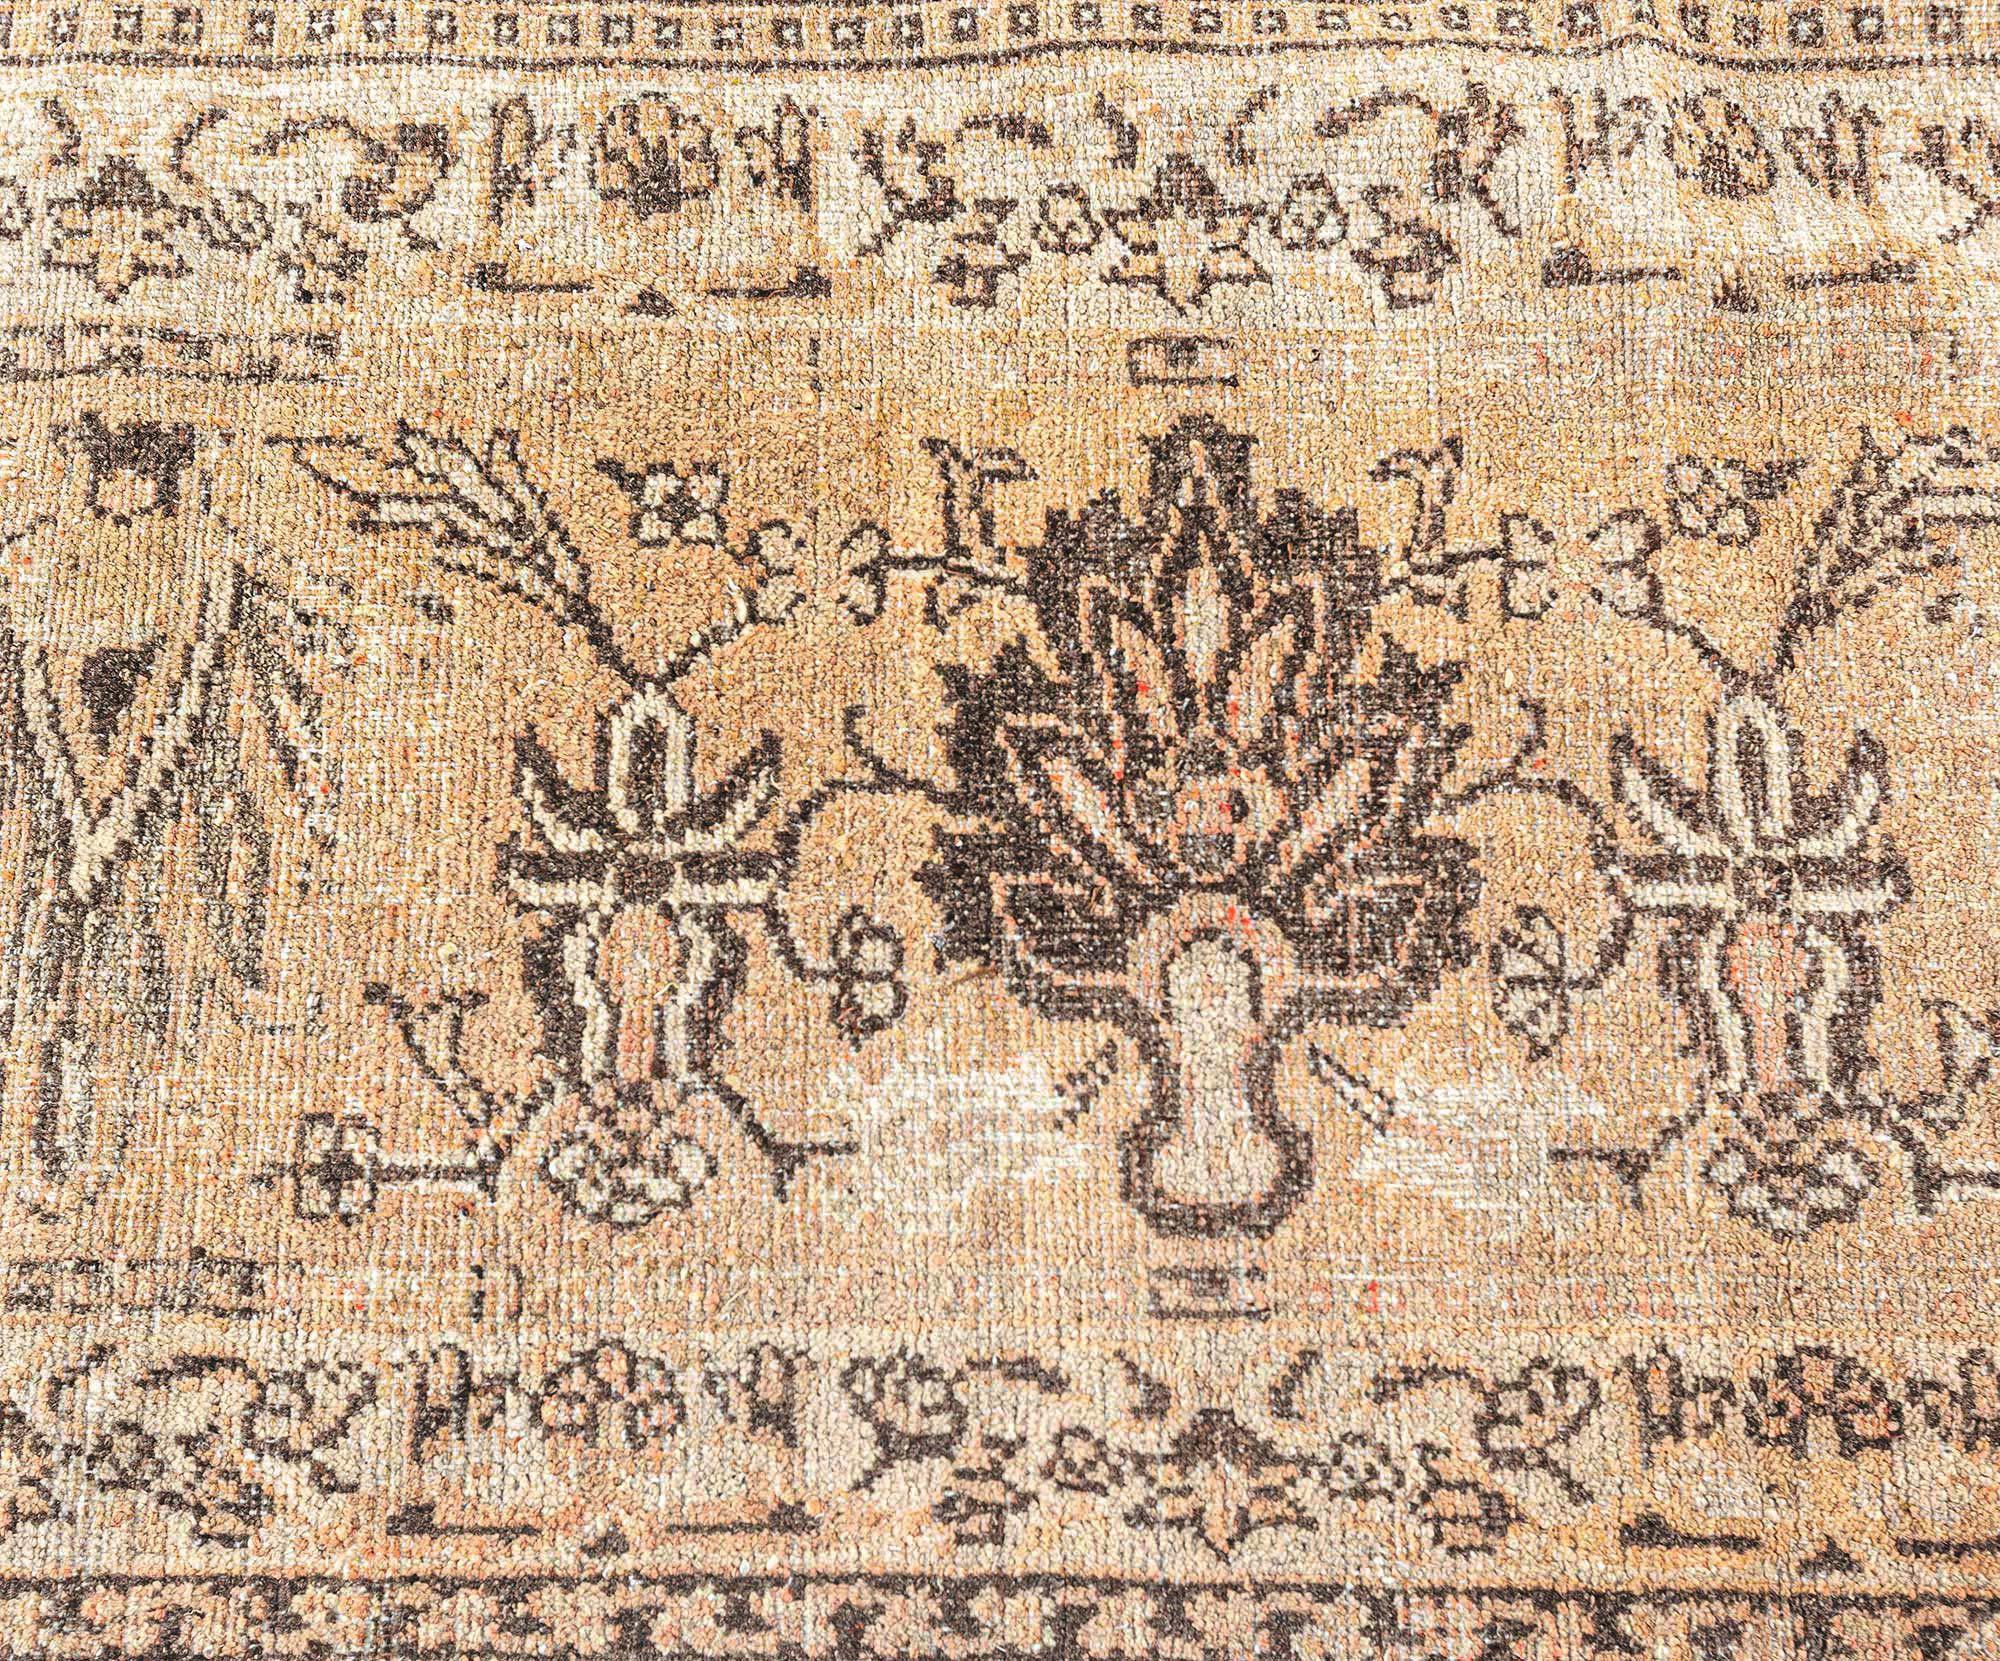 Authentic Indian Amritsar Handmade Wool Rug In Good Condition For Sale In New York, NY